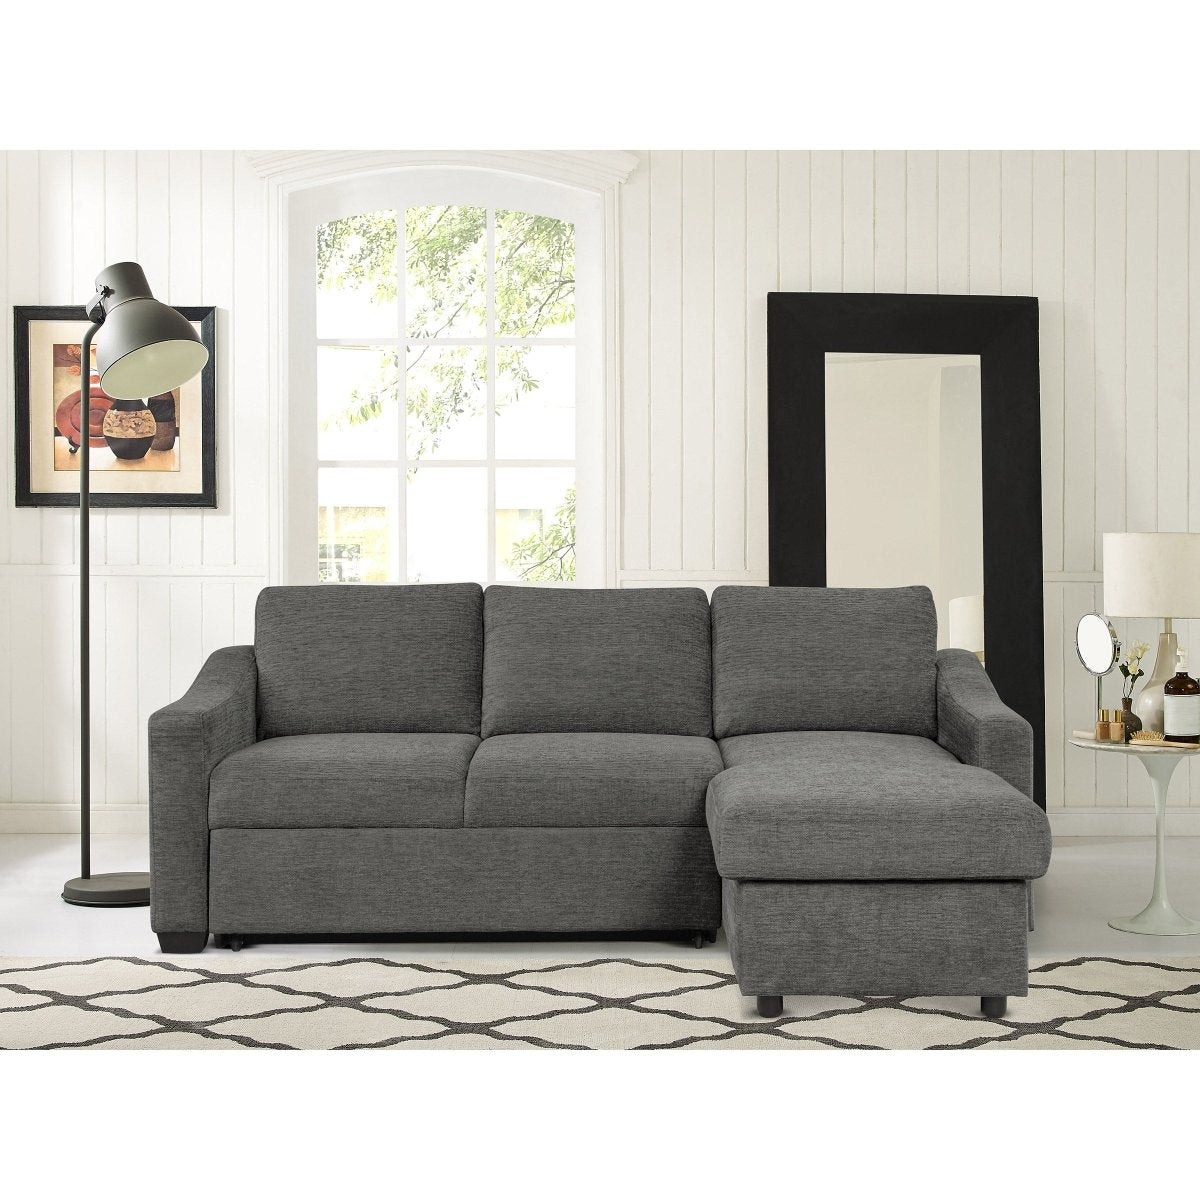 Coddle Aria Fabric Sleeper Sectional - Alpine Outlets